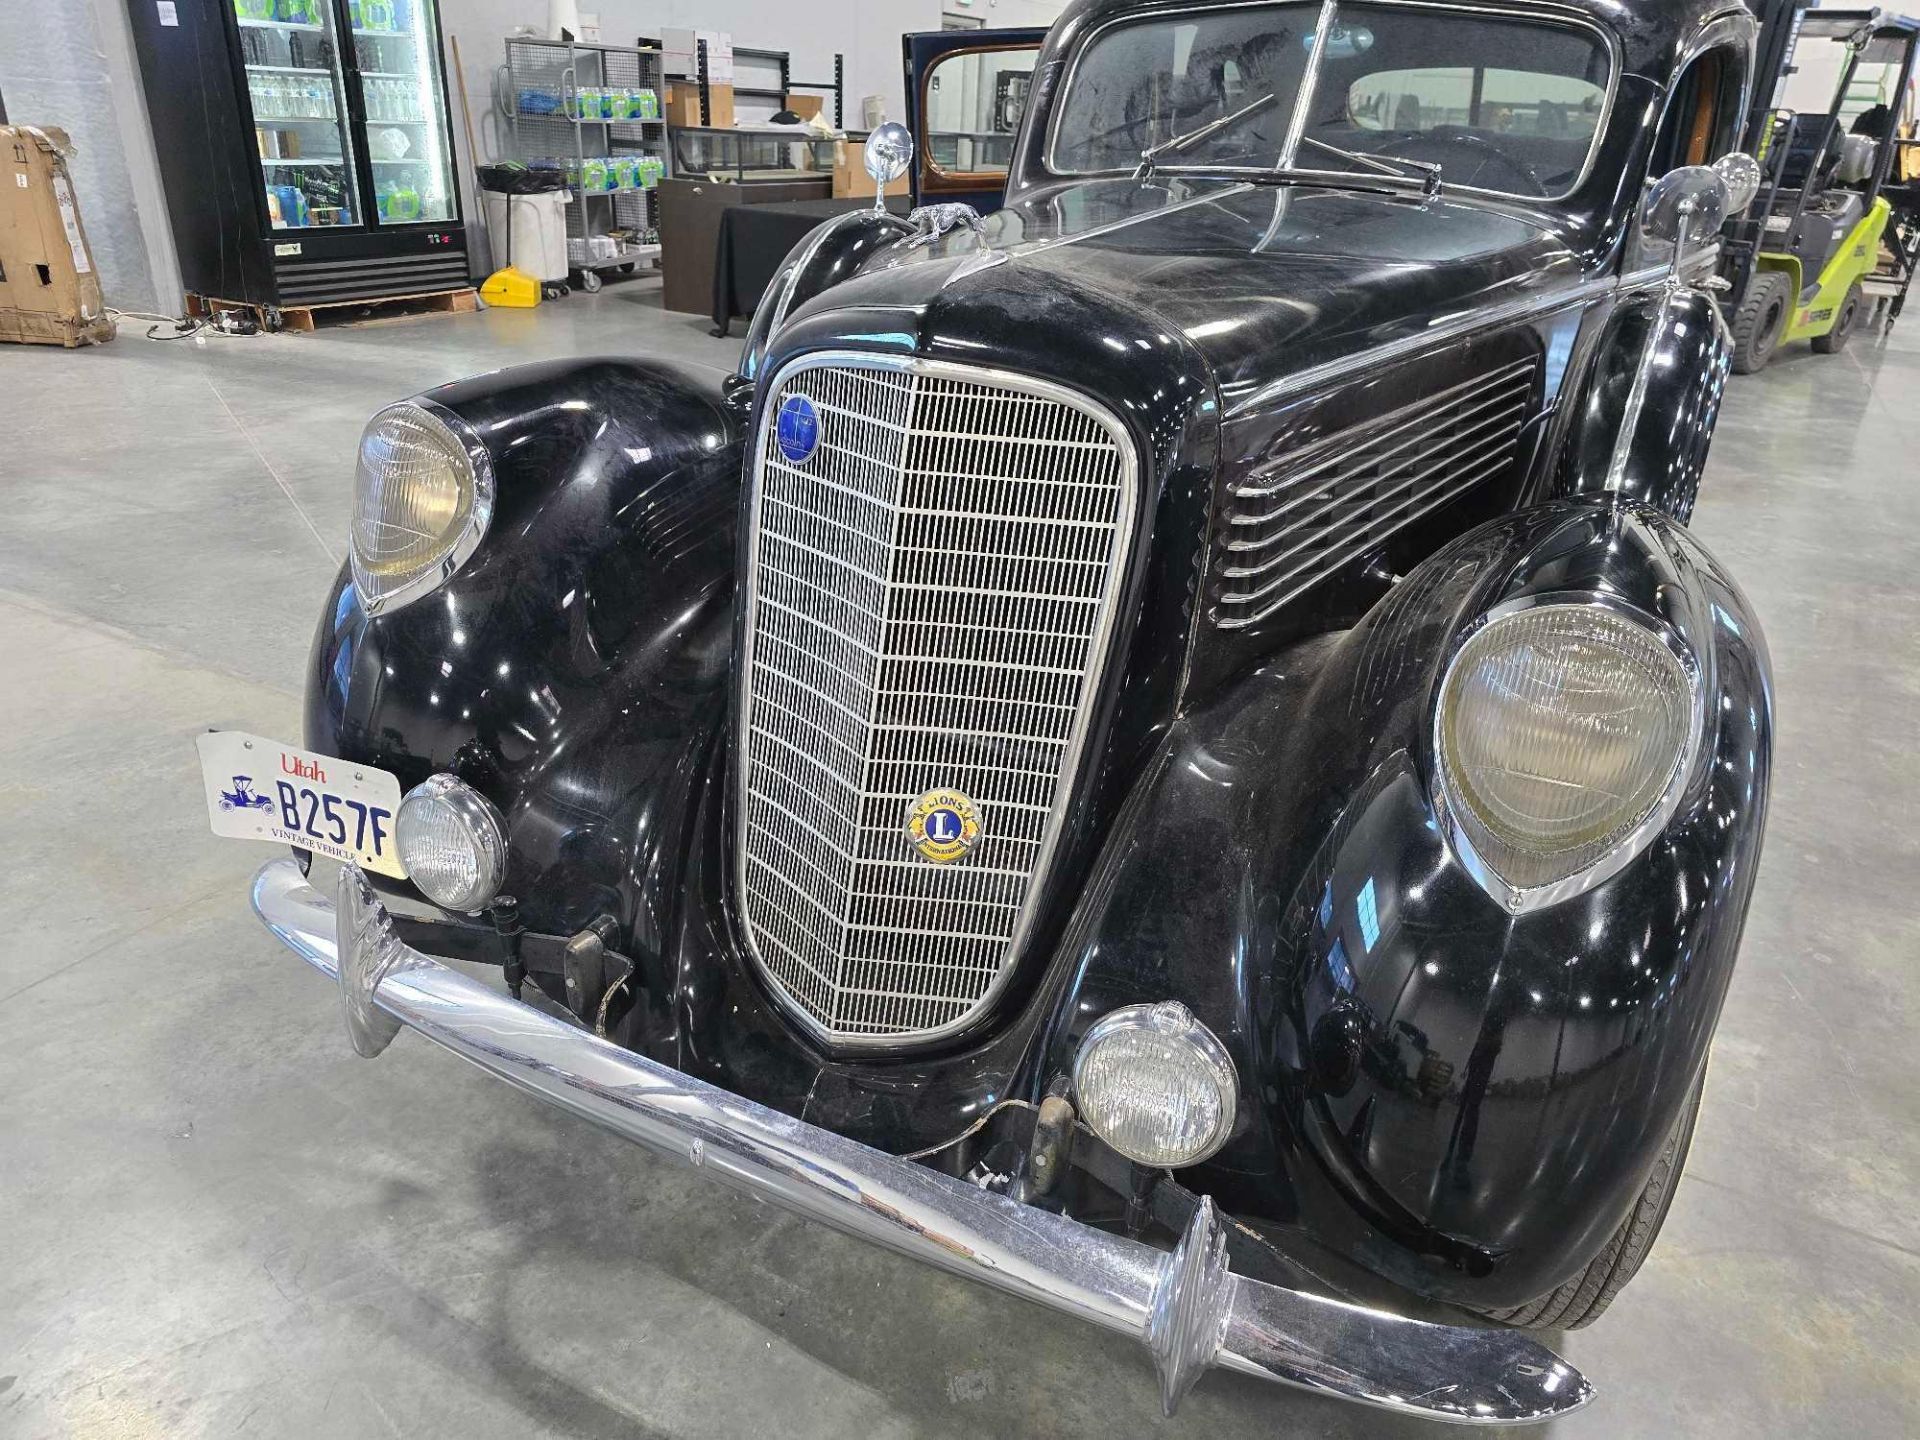 1938 Lincoln Model K v12 (last ran 4 years ago, we believe it needs new gas and a battery)  VIN #K91 - Image 2 of 37